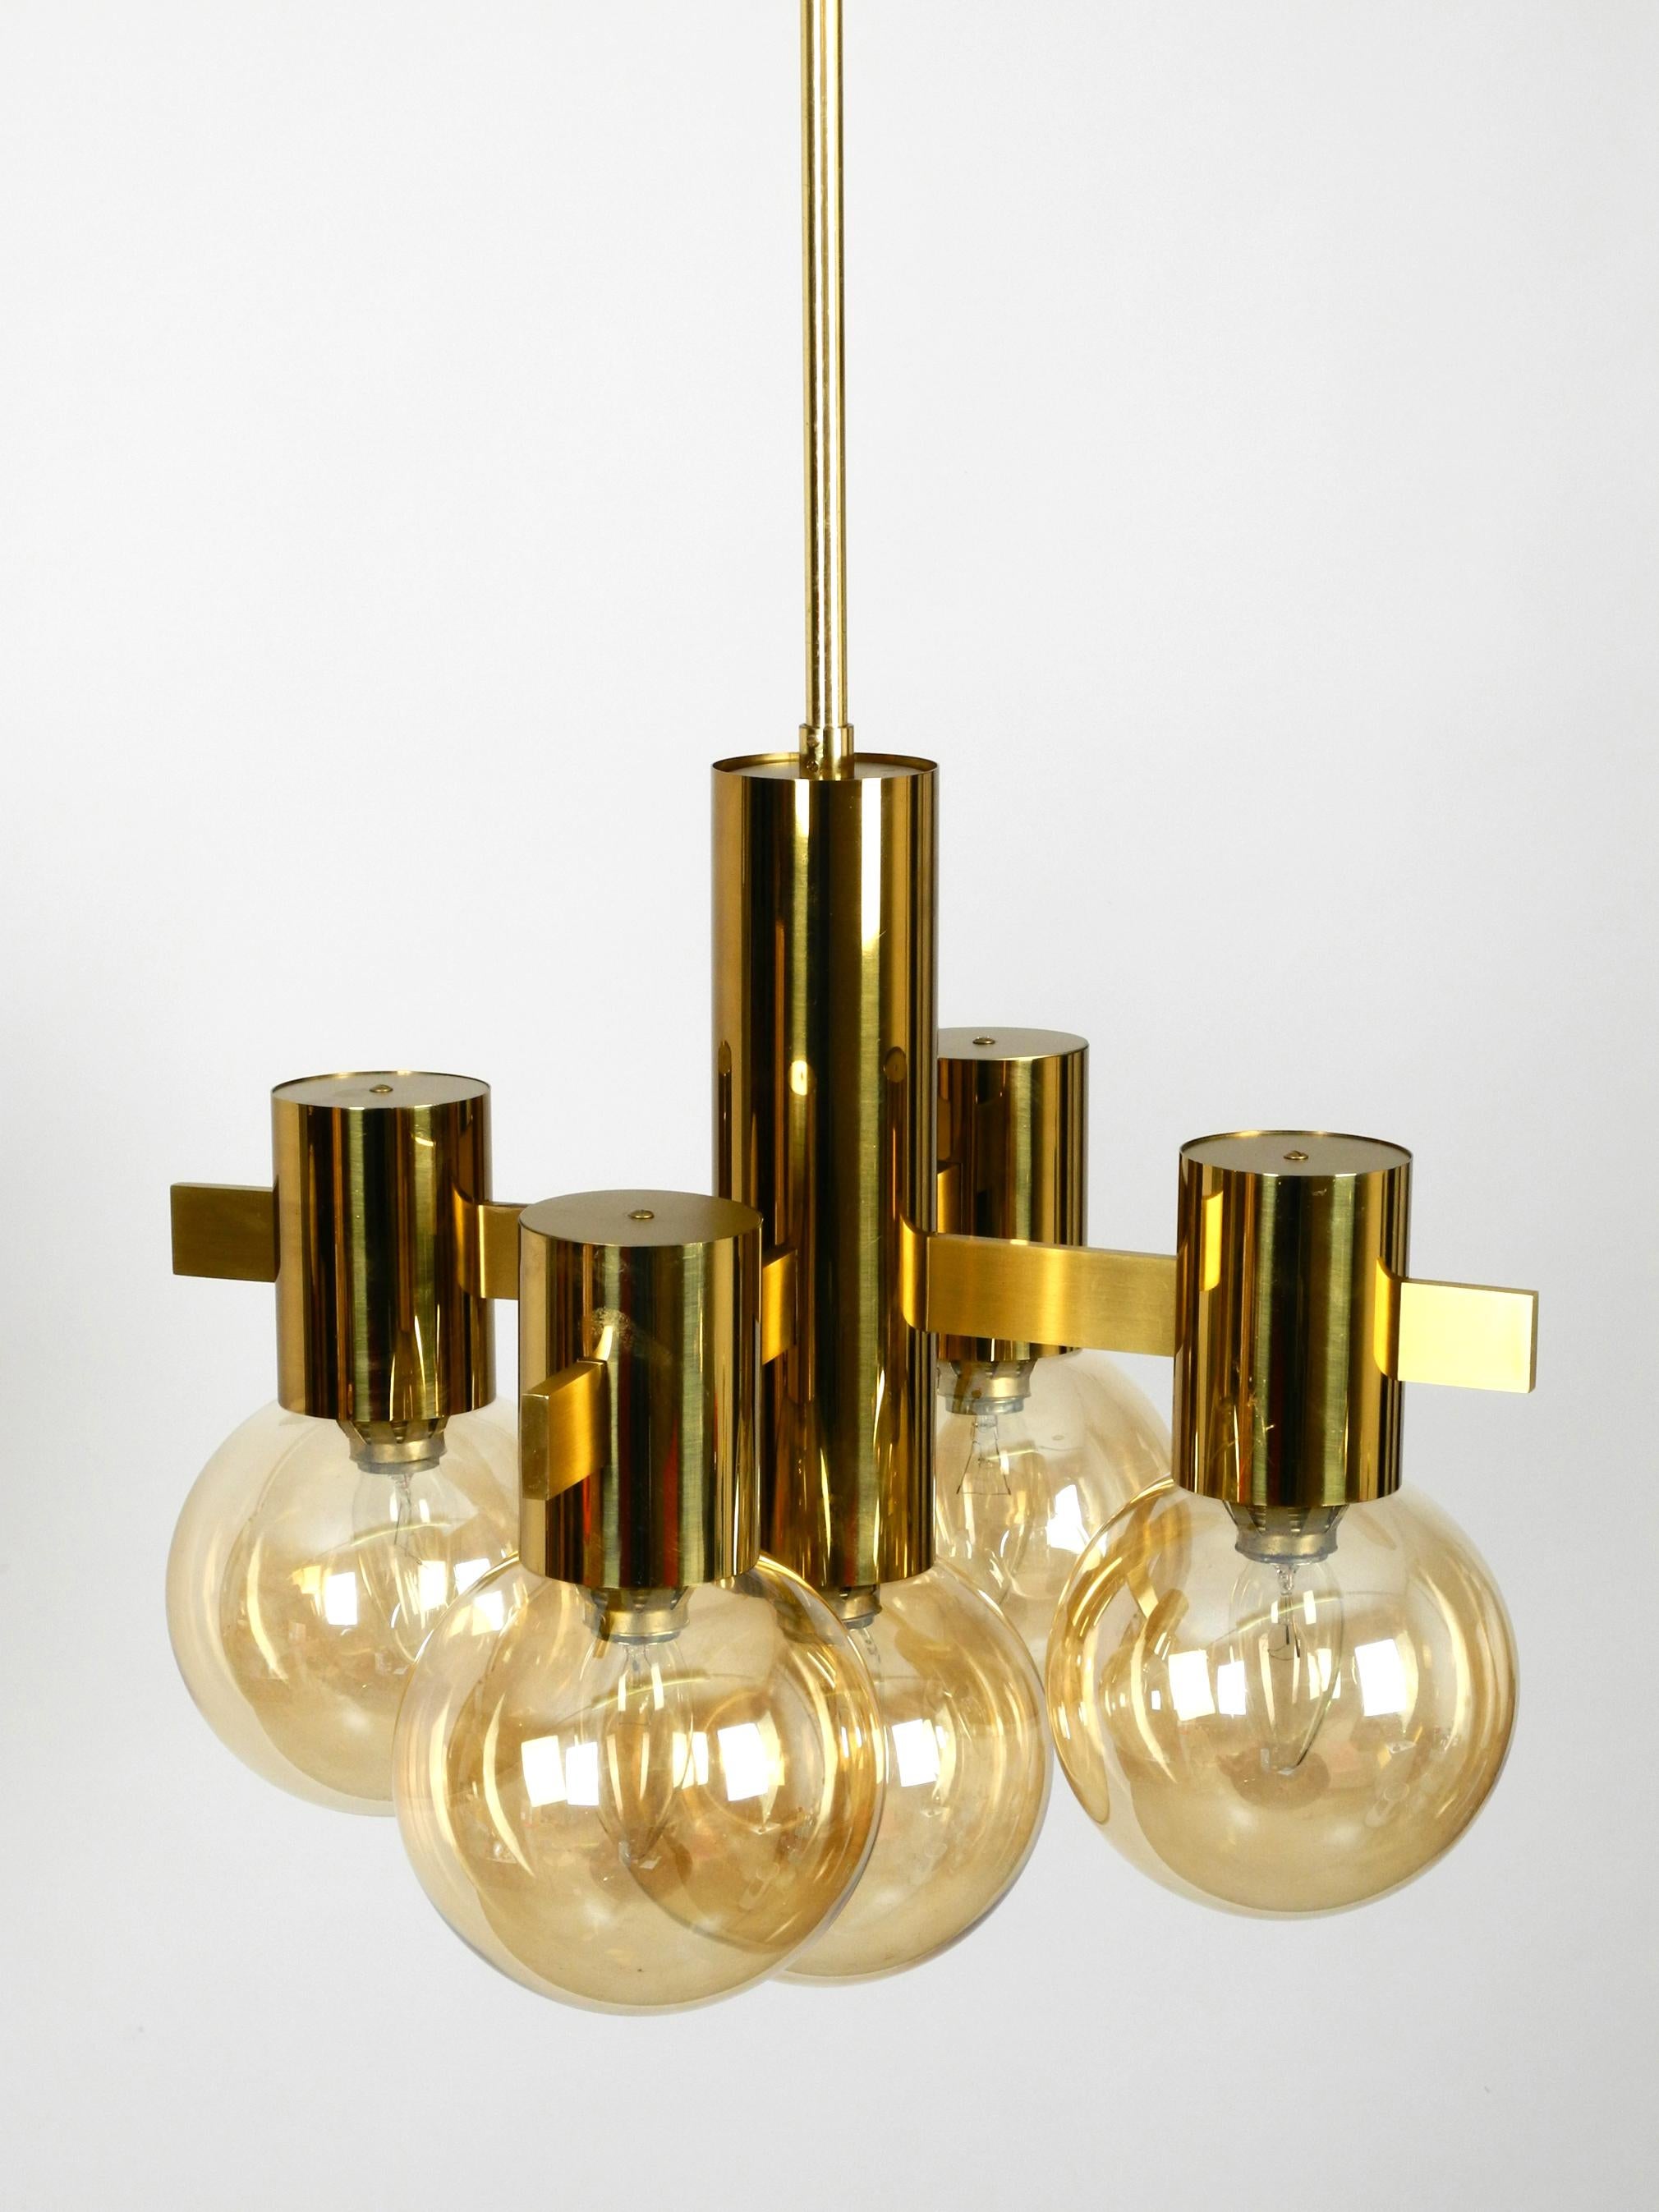 Beautiful 1960s Brass Ceiling Lamp by Hans Agne Jakobsson with 5 Glass Balls 7